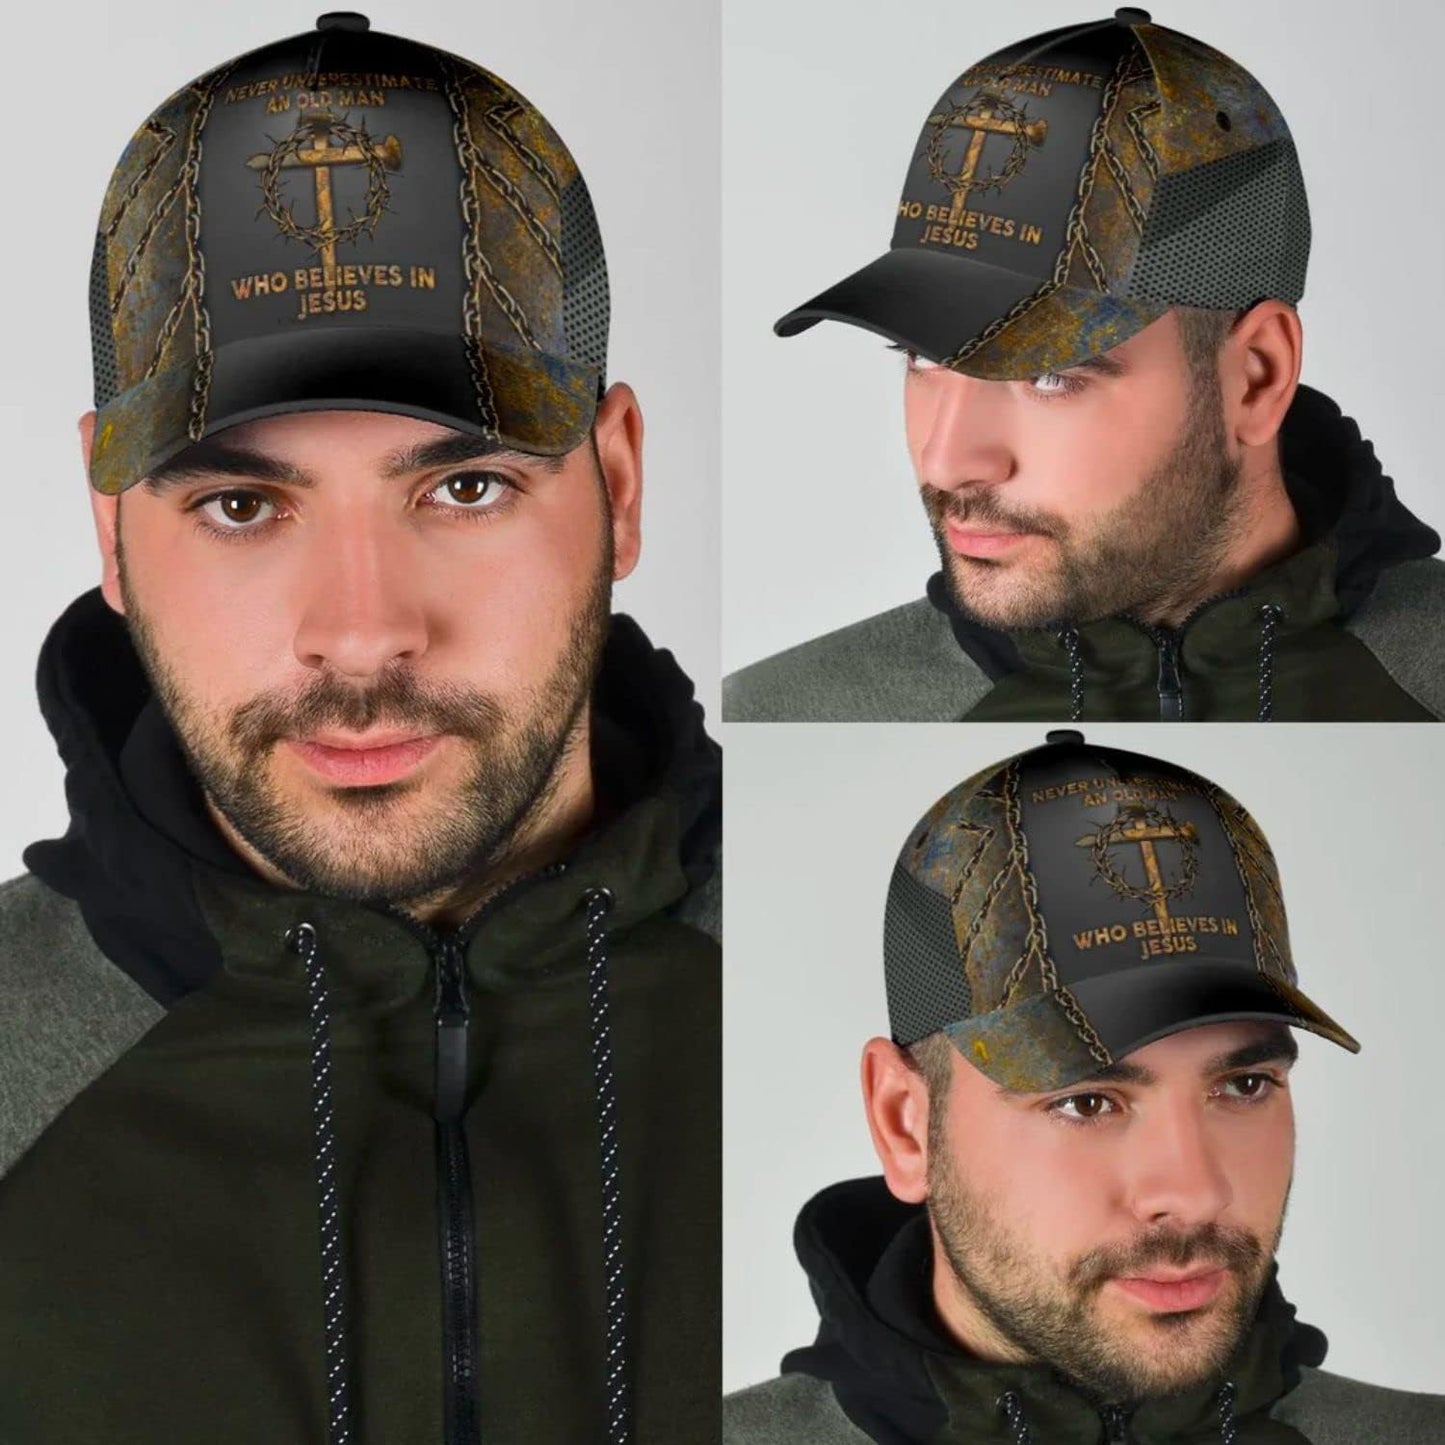 Never Underestimate Who Believes In Jesus Classic Hat All Over Print - Christian Hats for Men and Women